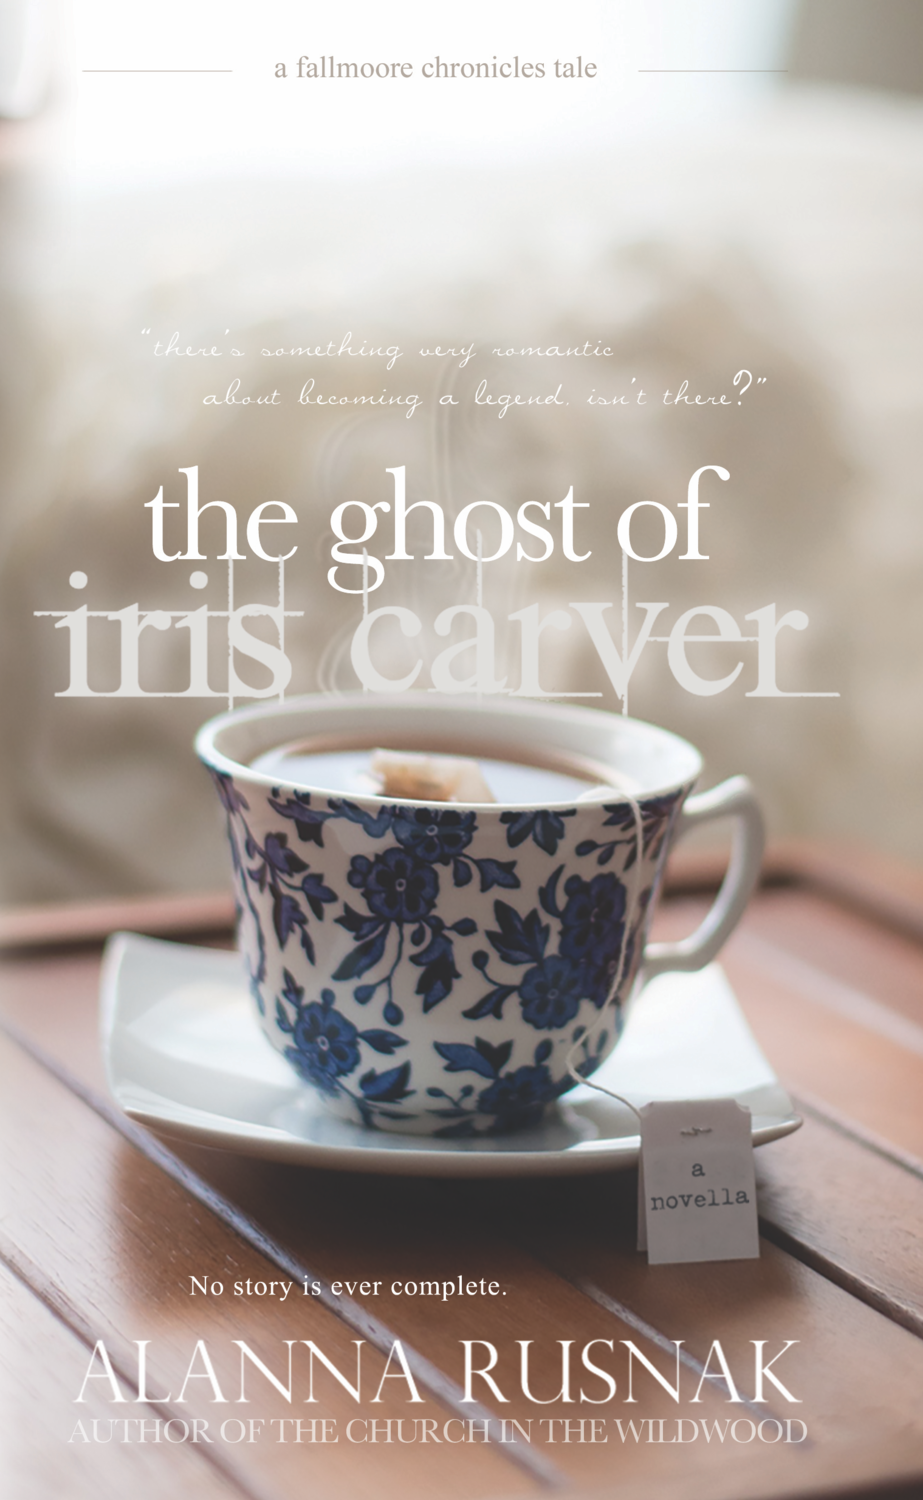 The Ghost of Iris Carver